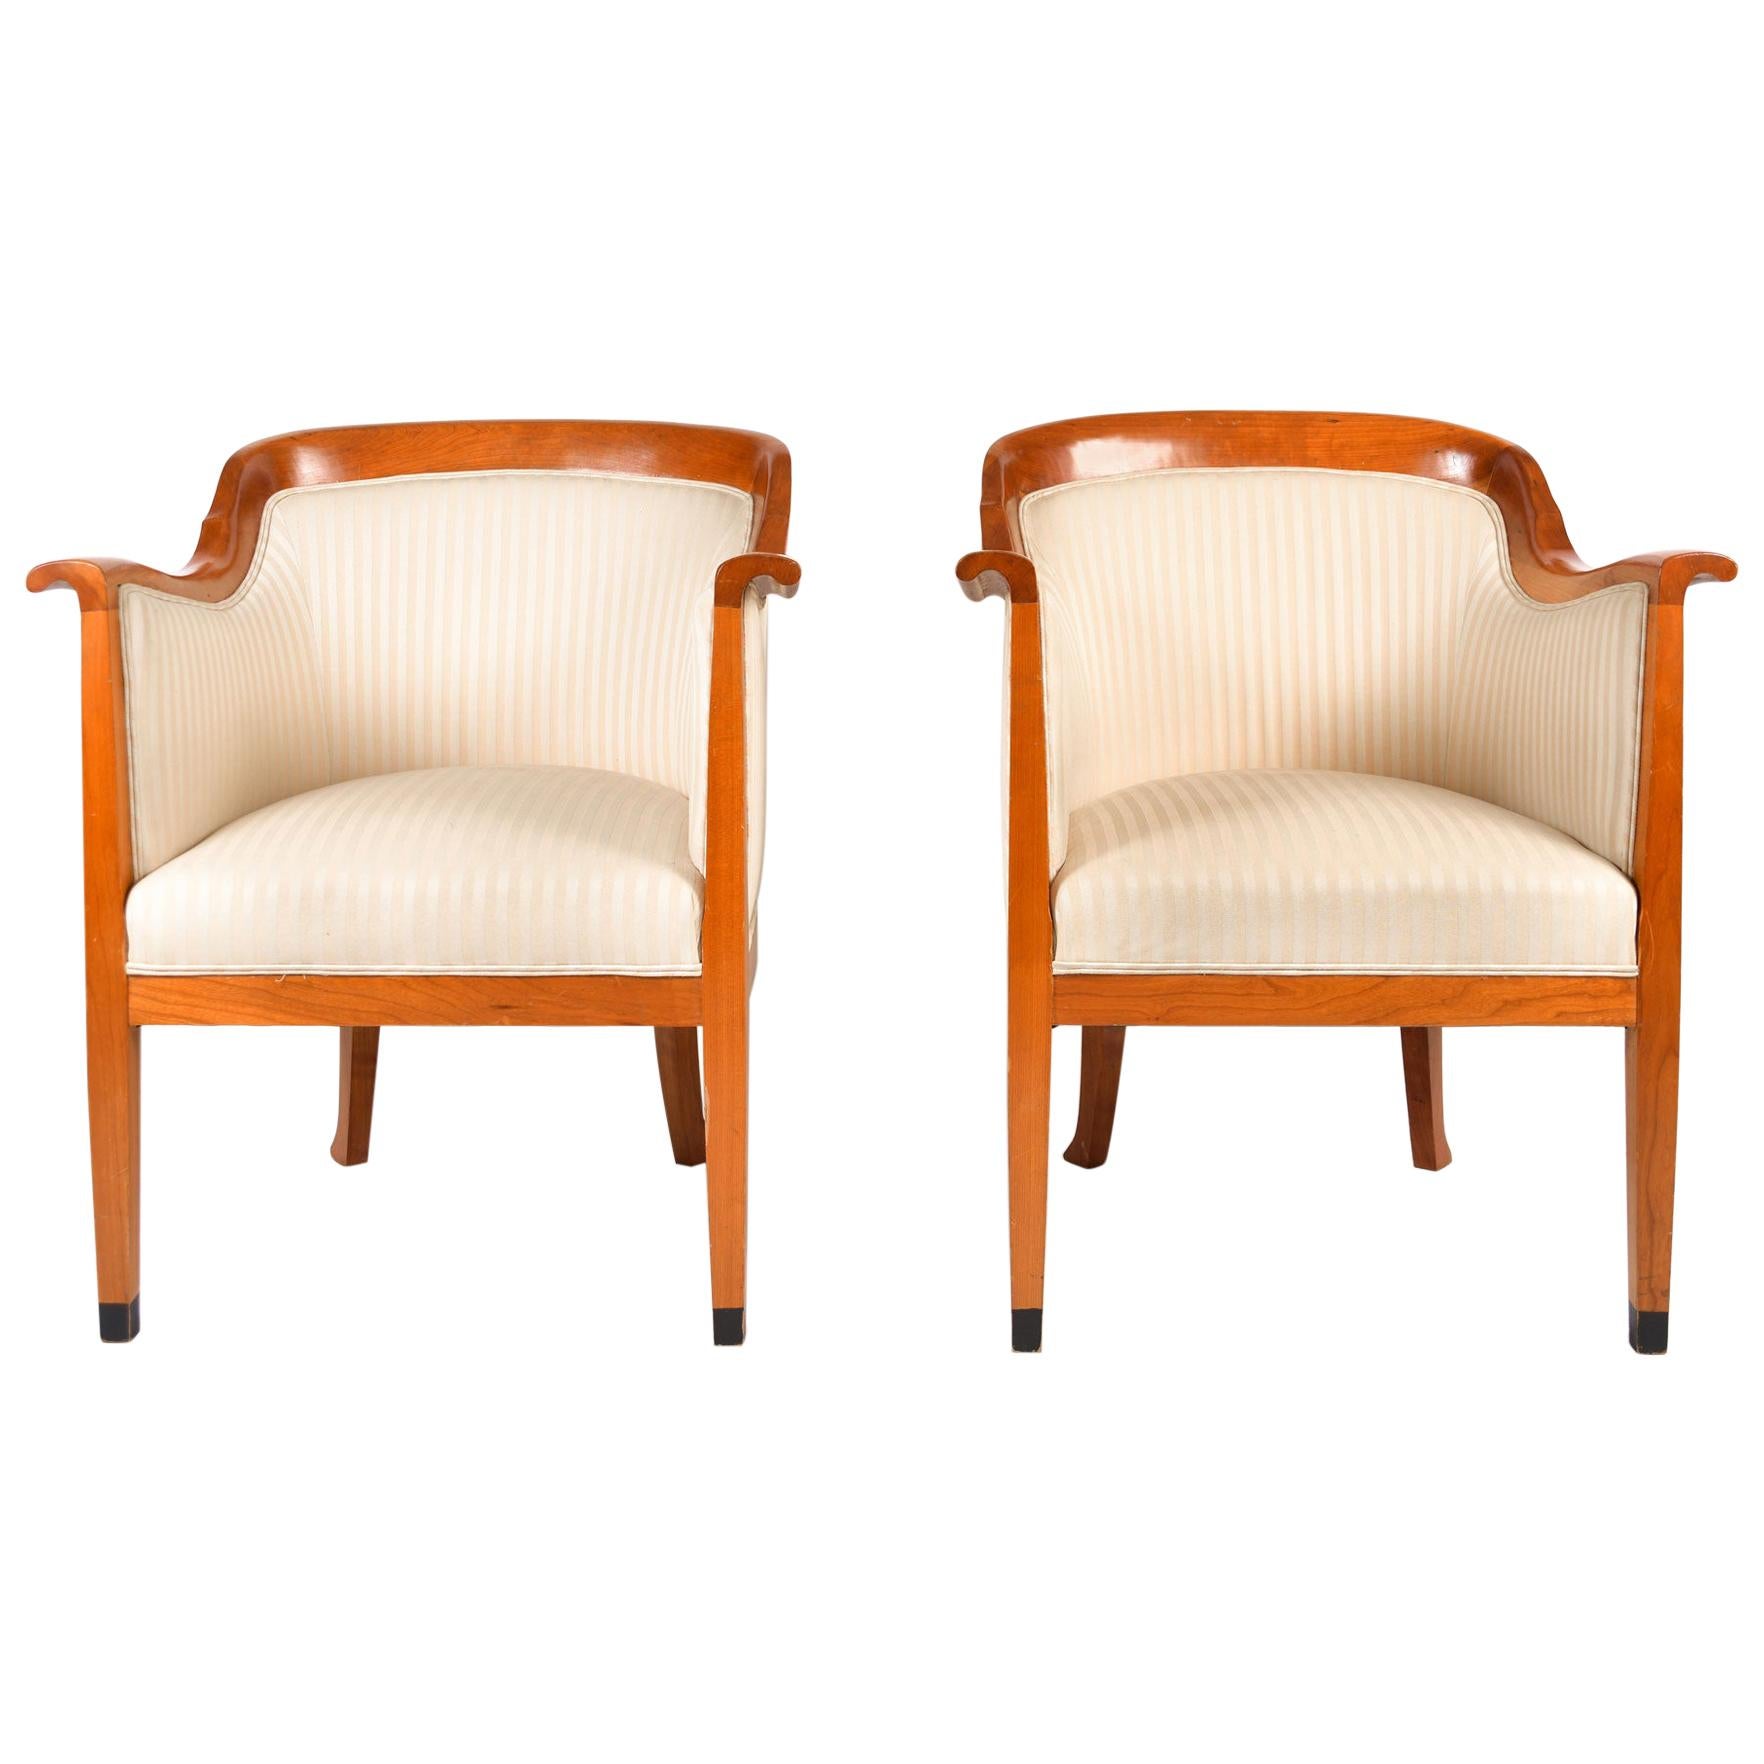 Pair of 1980s English Cherrywood Occasional Chairs in the Style of Biedermeier